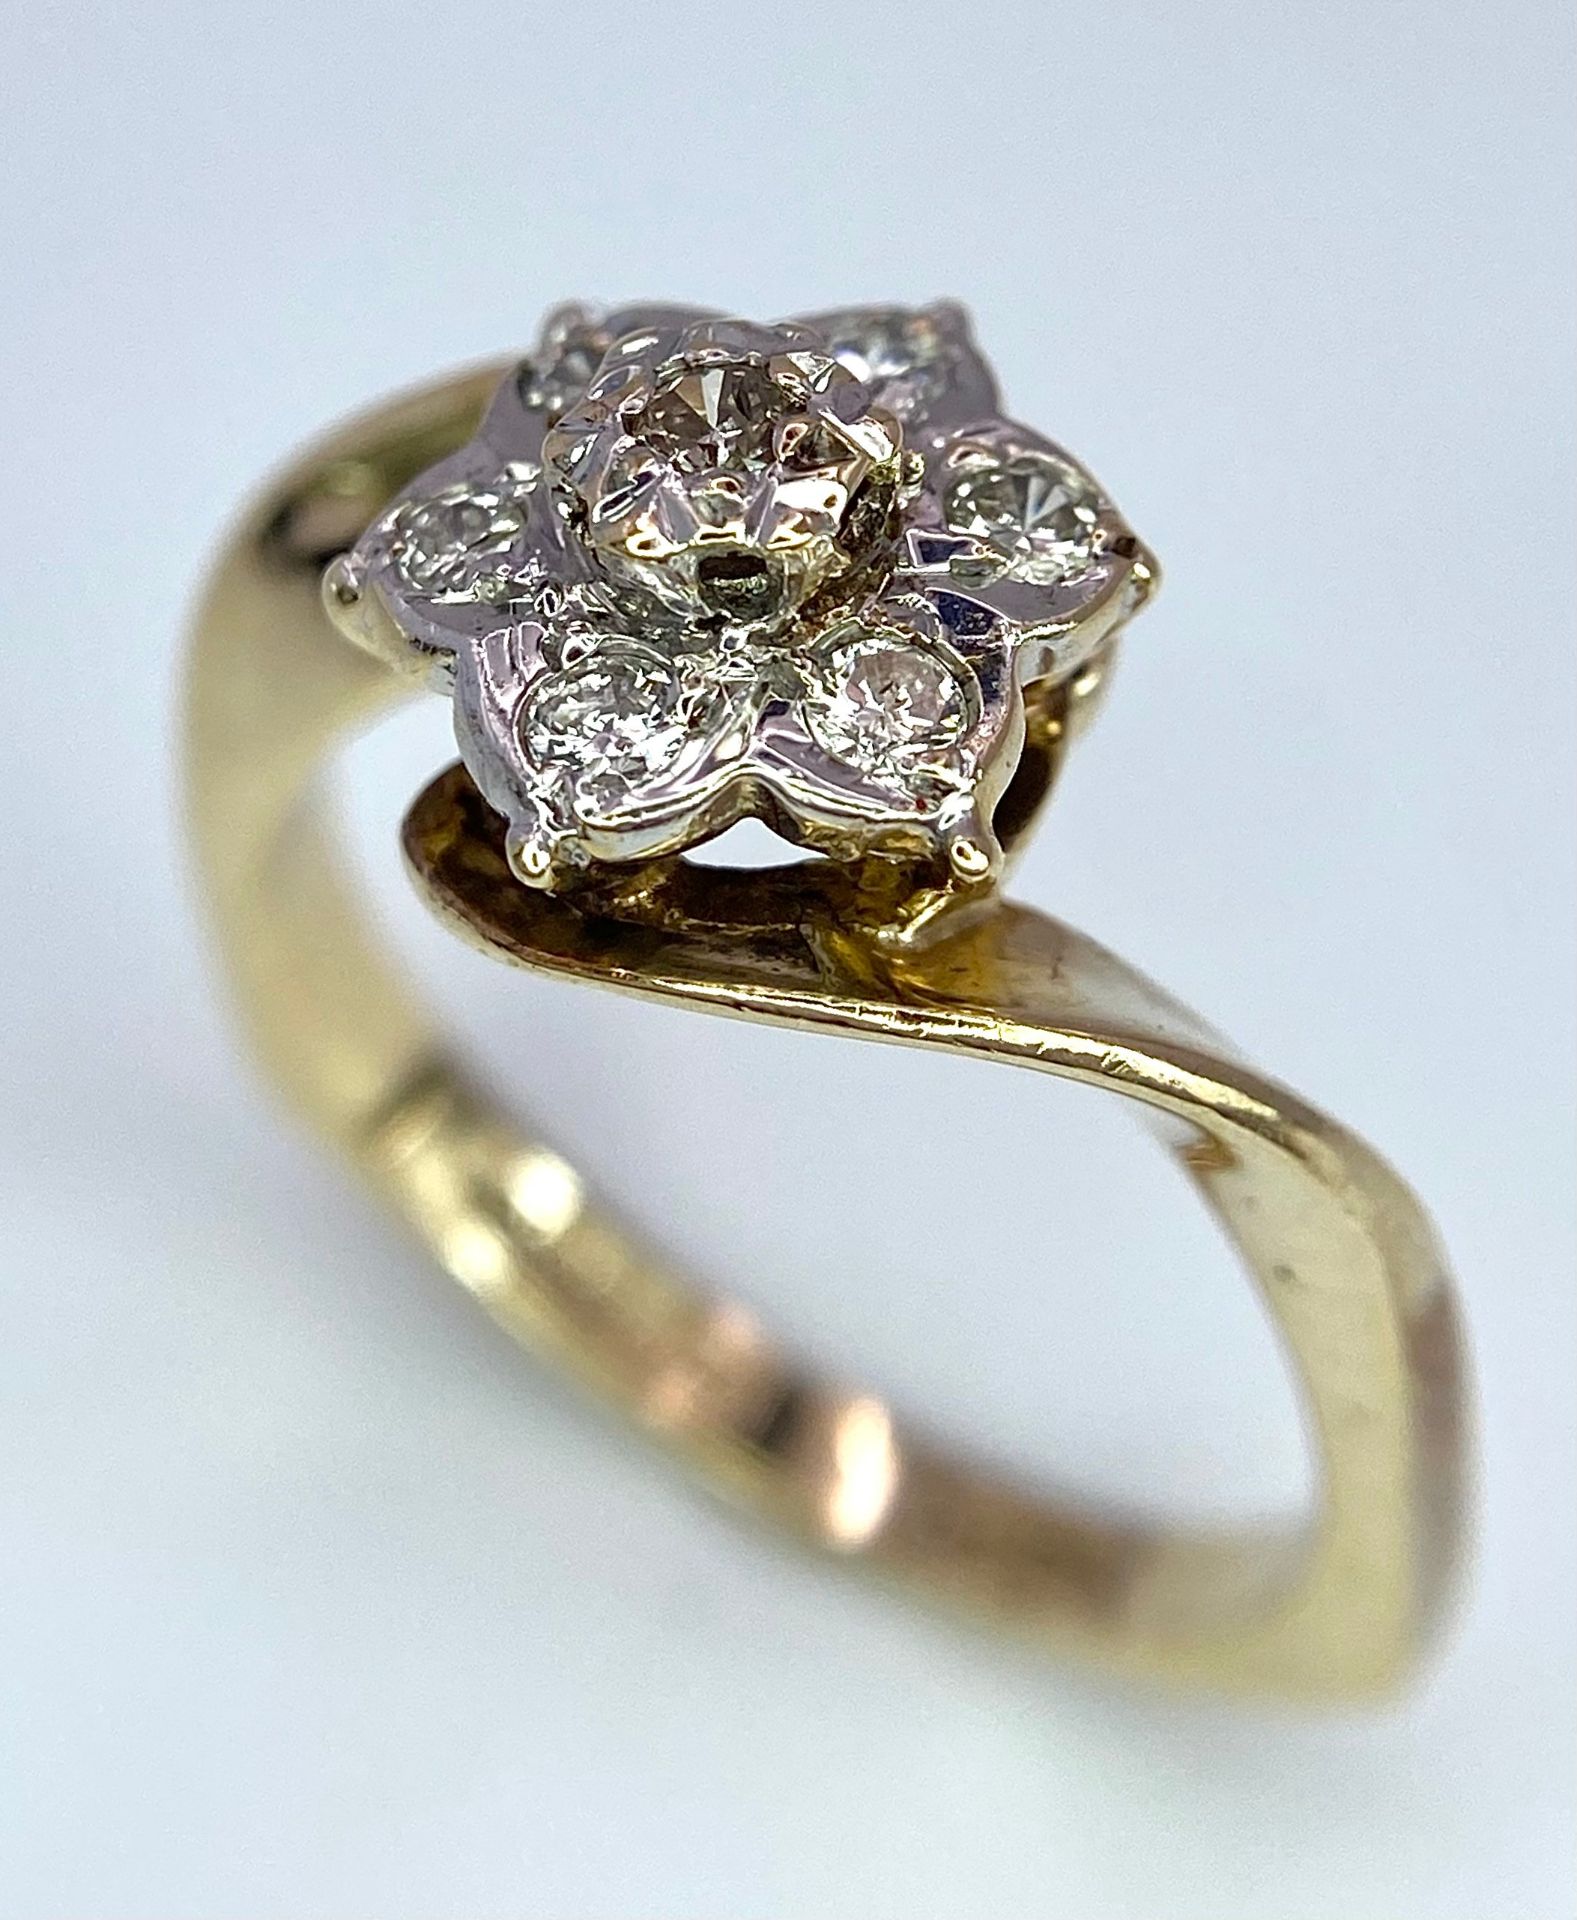 A 9K YELLOW GOLD DIAMOND FANCY VINTAGE CLUSTER RING. Size L, 2.7g total weight. Ref: SC 9008 - Image 2 of 7